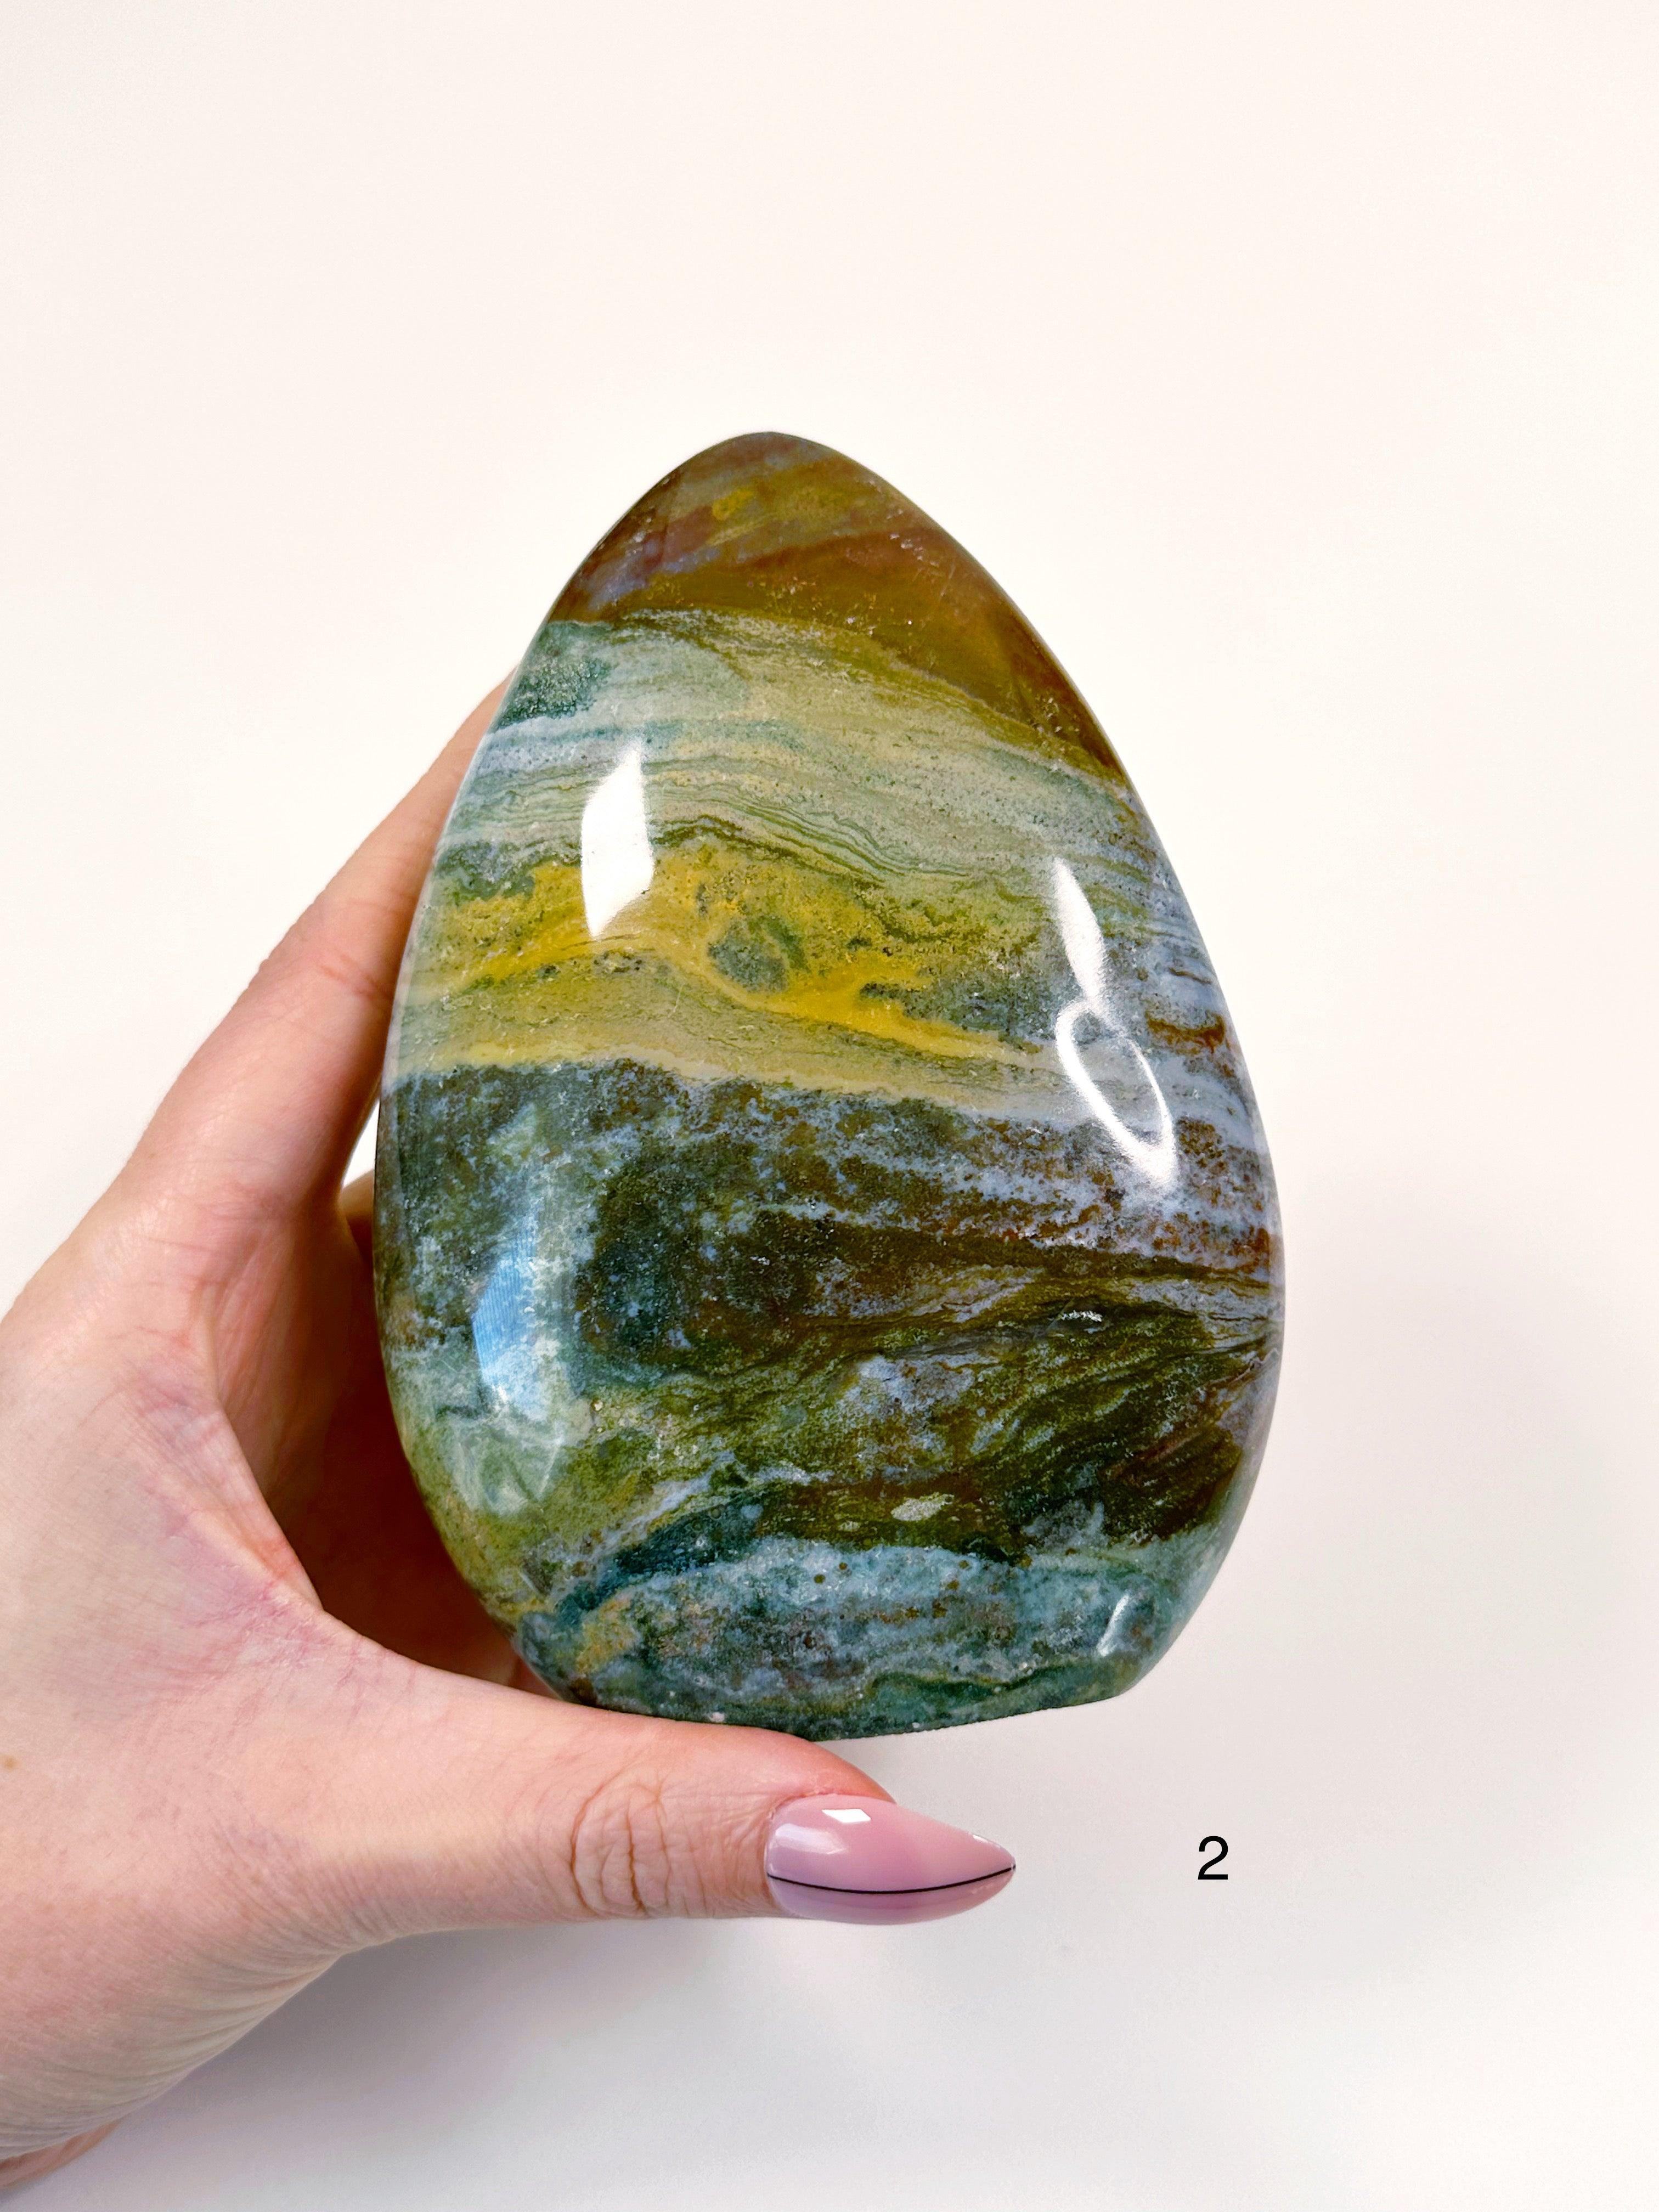 PICK YOUR OWN: OCEAN JASPER FREEFORMS - 33 bday, 444 sale, emotional support, freeform, holiday sale, new year sale, ocean jasper, one of a kind - The Mineral Maven